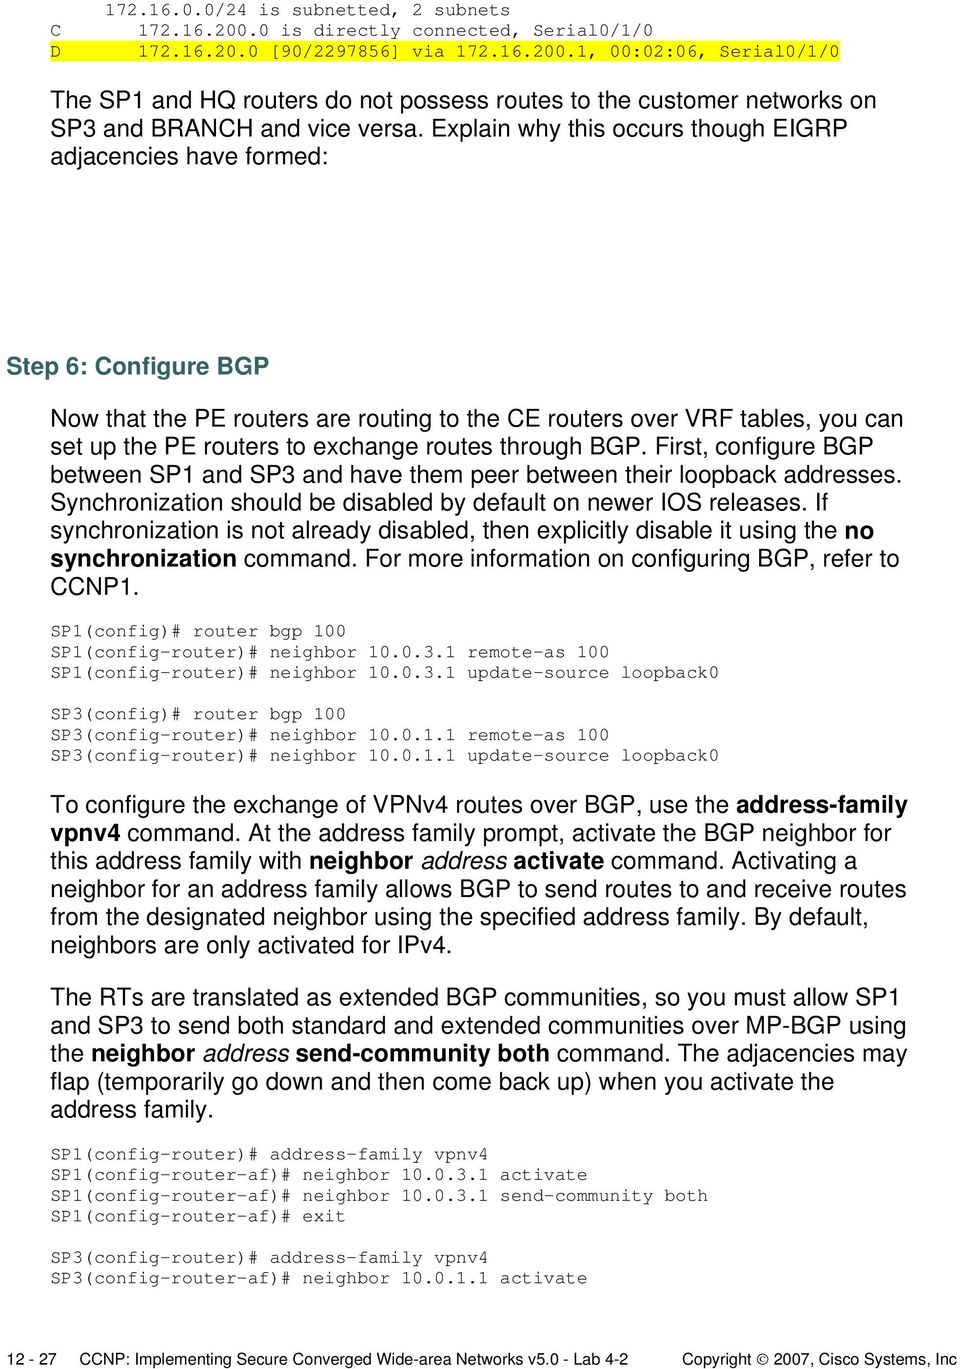 routes through BGP. First, configure BGP between SP1 and SP3 and have them peer between their loopback addresses. Synchronization should be disabled by default on newer IOS releases.